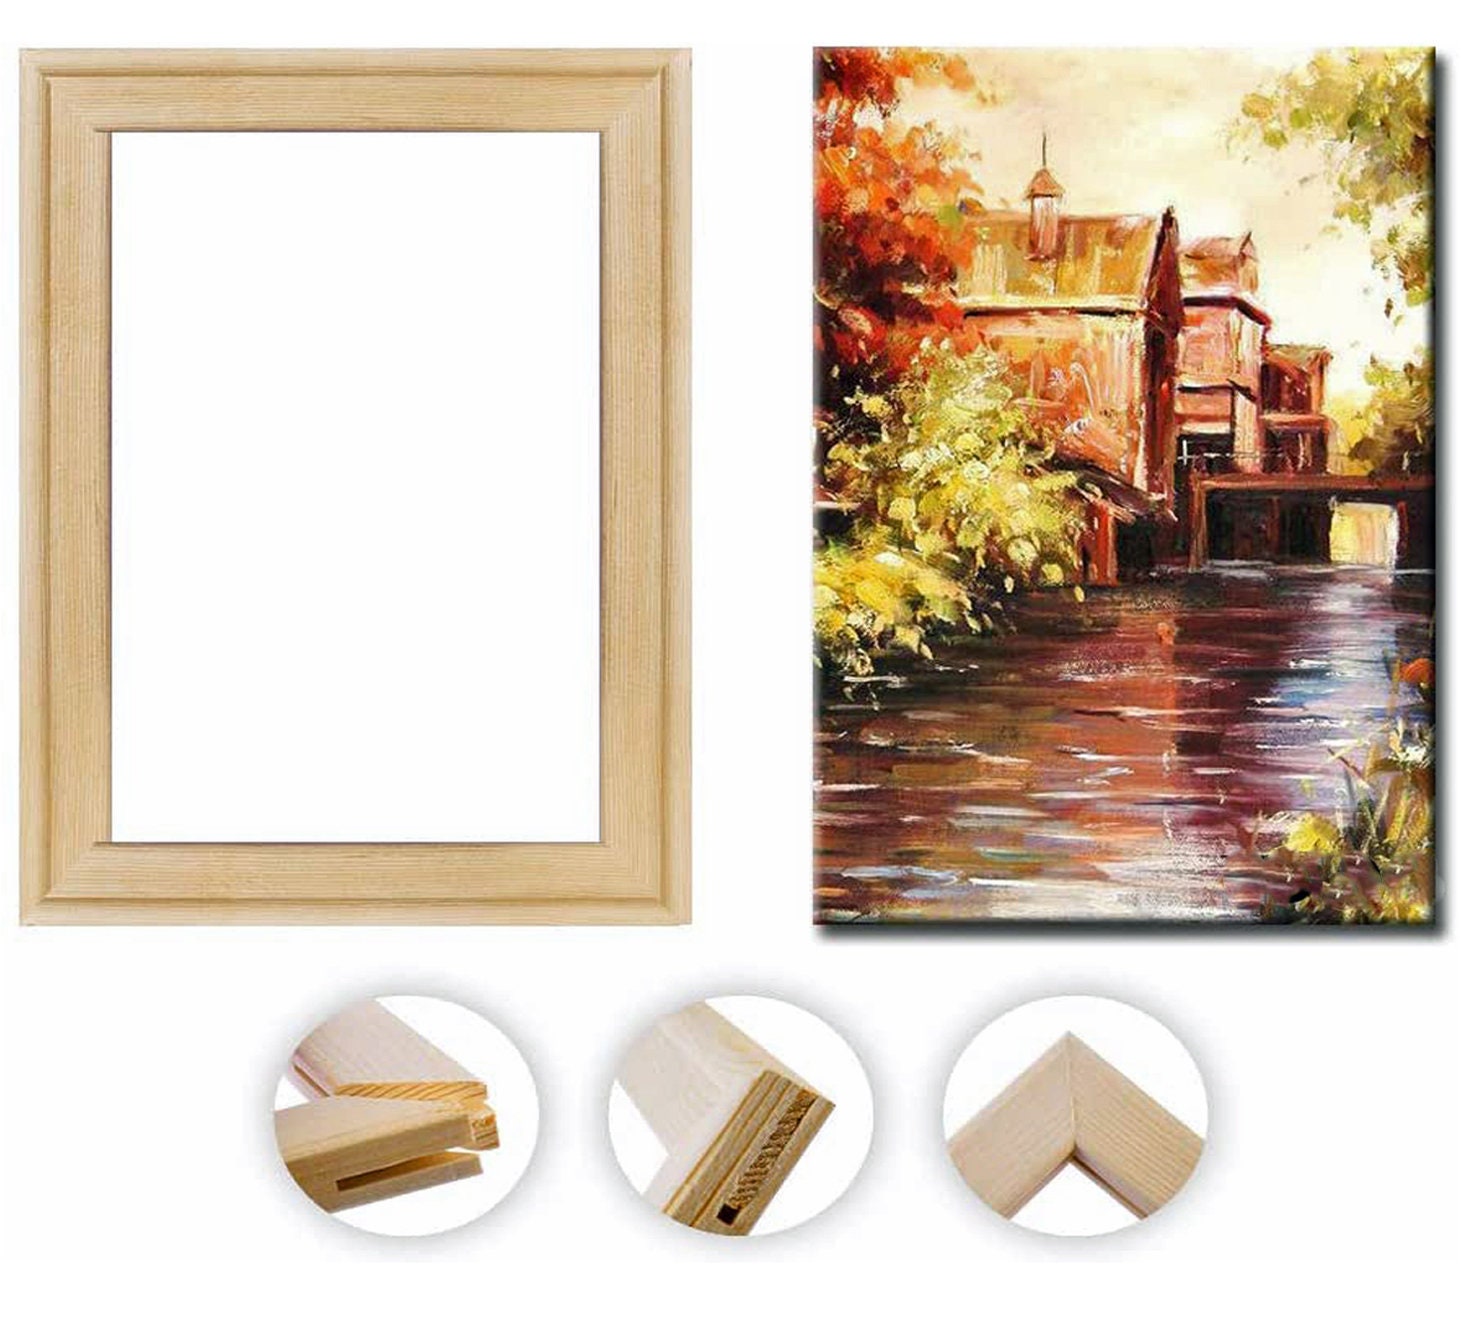 Wood Red Small 34 x 24 x 3cm Feel Good Art Giclée Printed Canvas with Solid White Wooden Frame Surround &ltBe Happy> 34 x 24 cm 